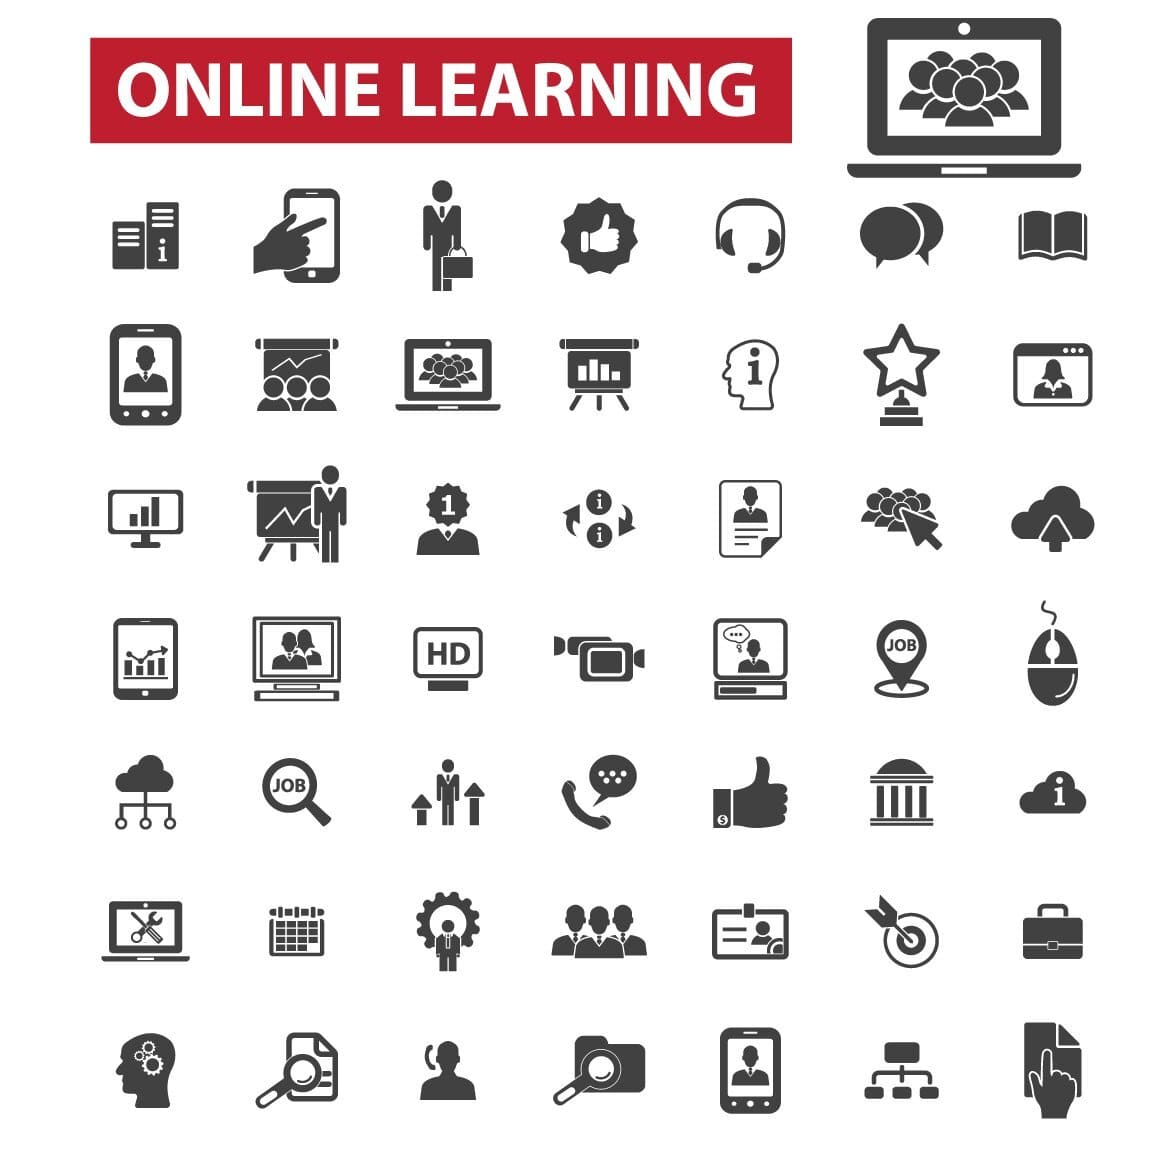 This set contains 49 online learning icons.